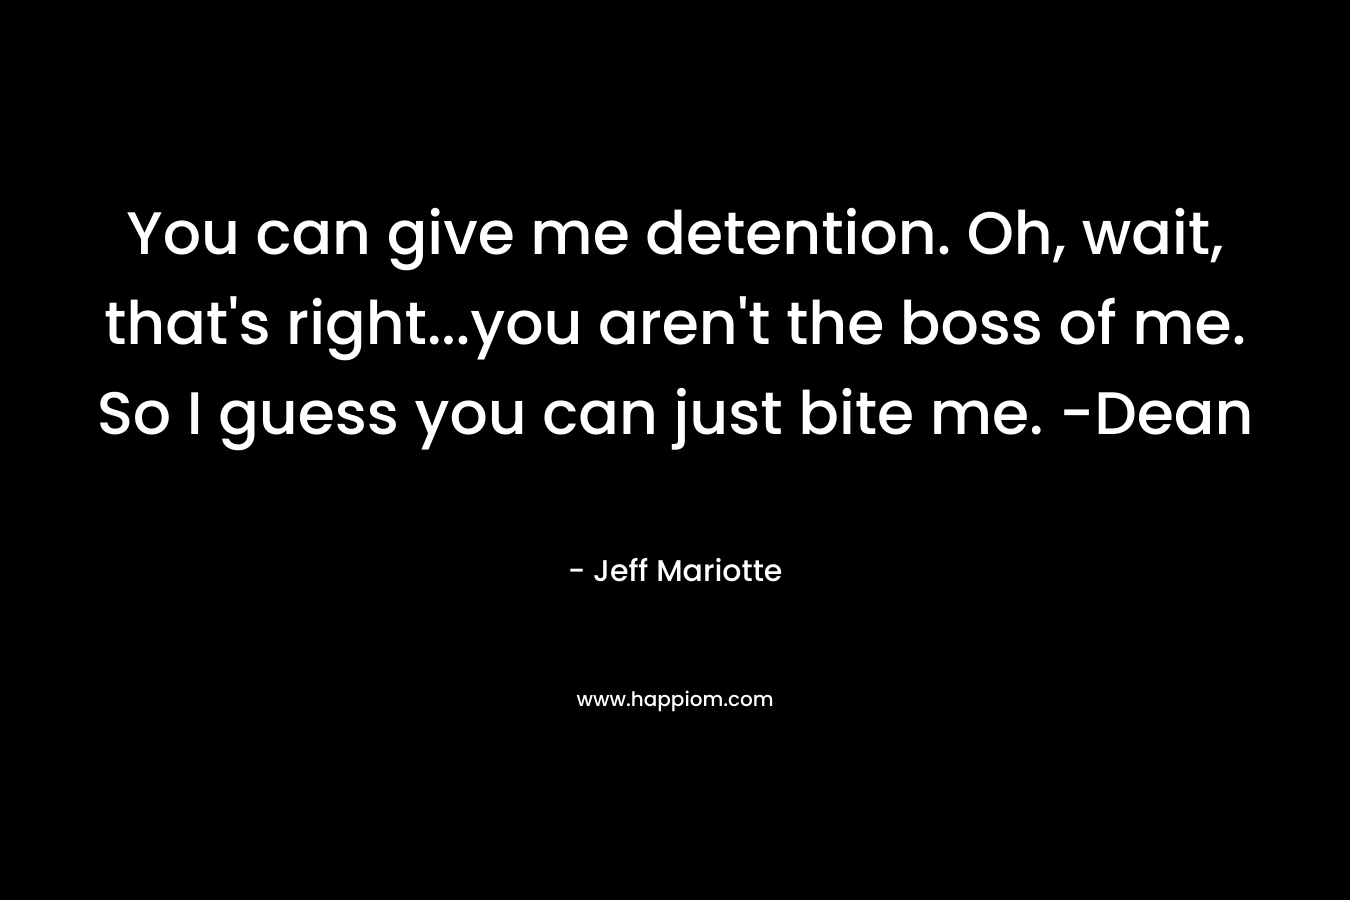 You can give me detention. Oh, wait, that’s right…you aren’t the boss of me. So I guess you can just bite me. -Dean – Jeff Mariotte